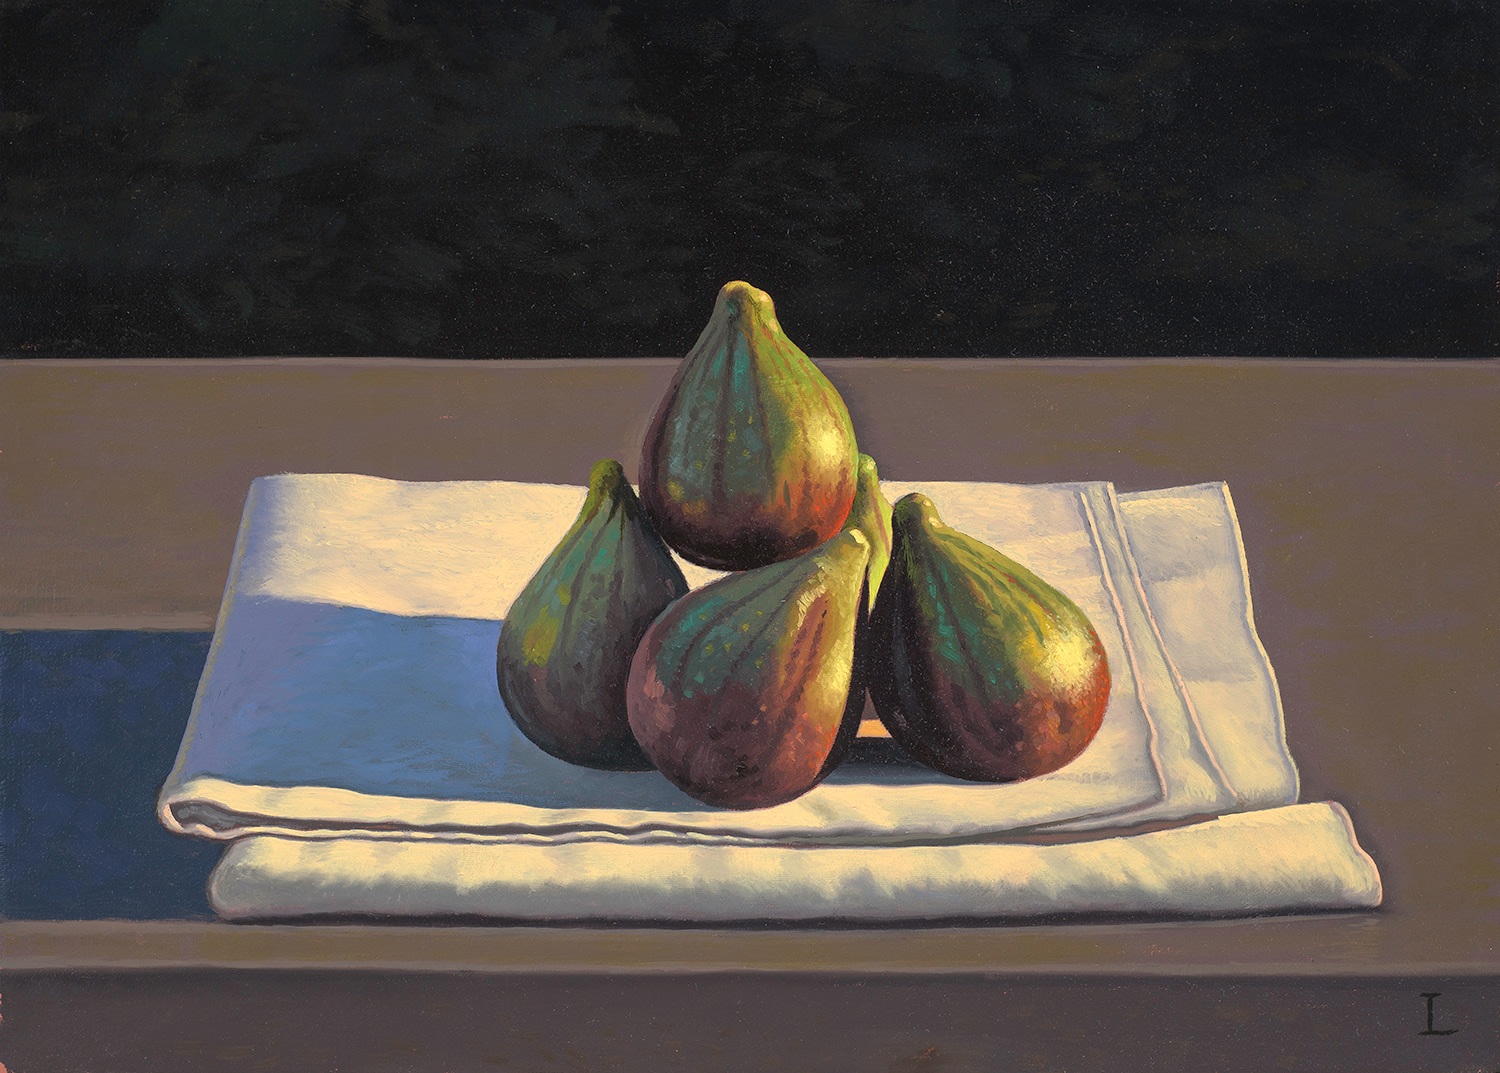 David Ligare (b. 1945), Still Life with Figs on Cloth, 2014